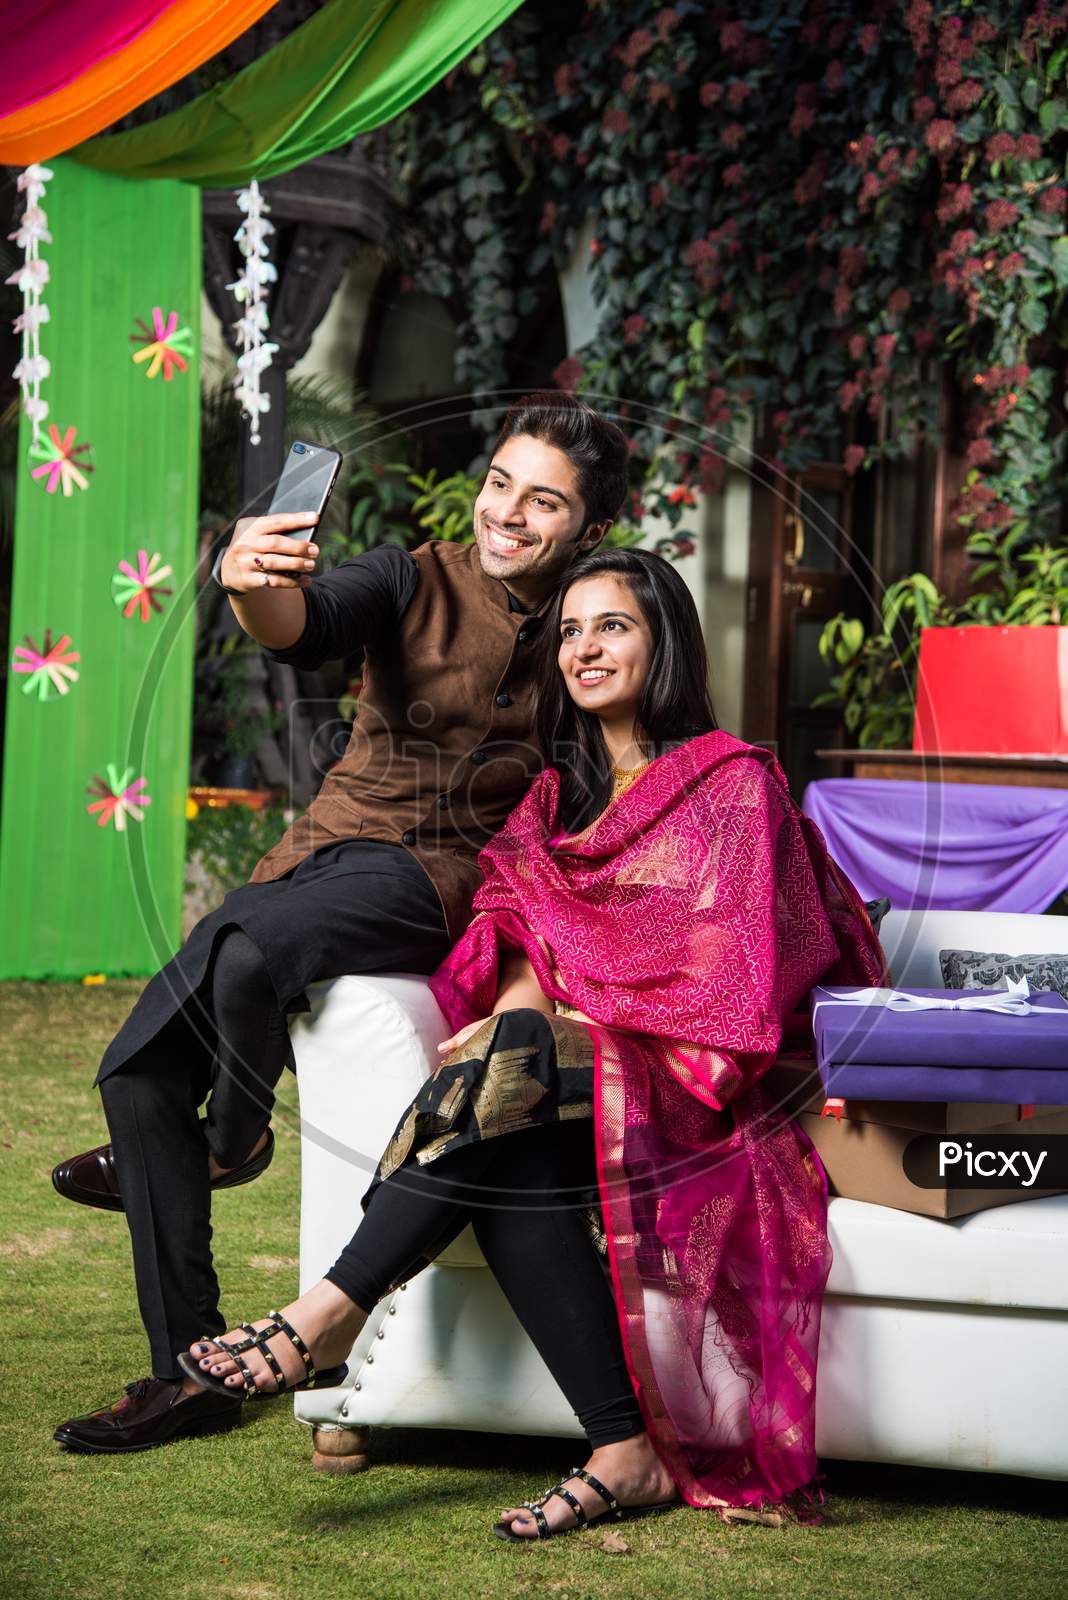 Couple taking selfie with smartphone on diwali or wedding party